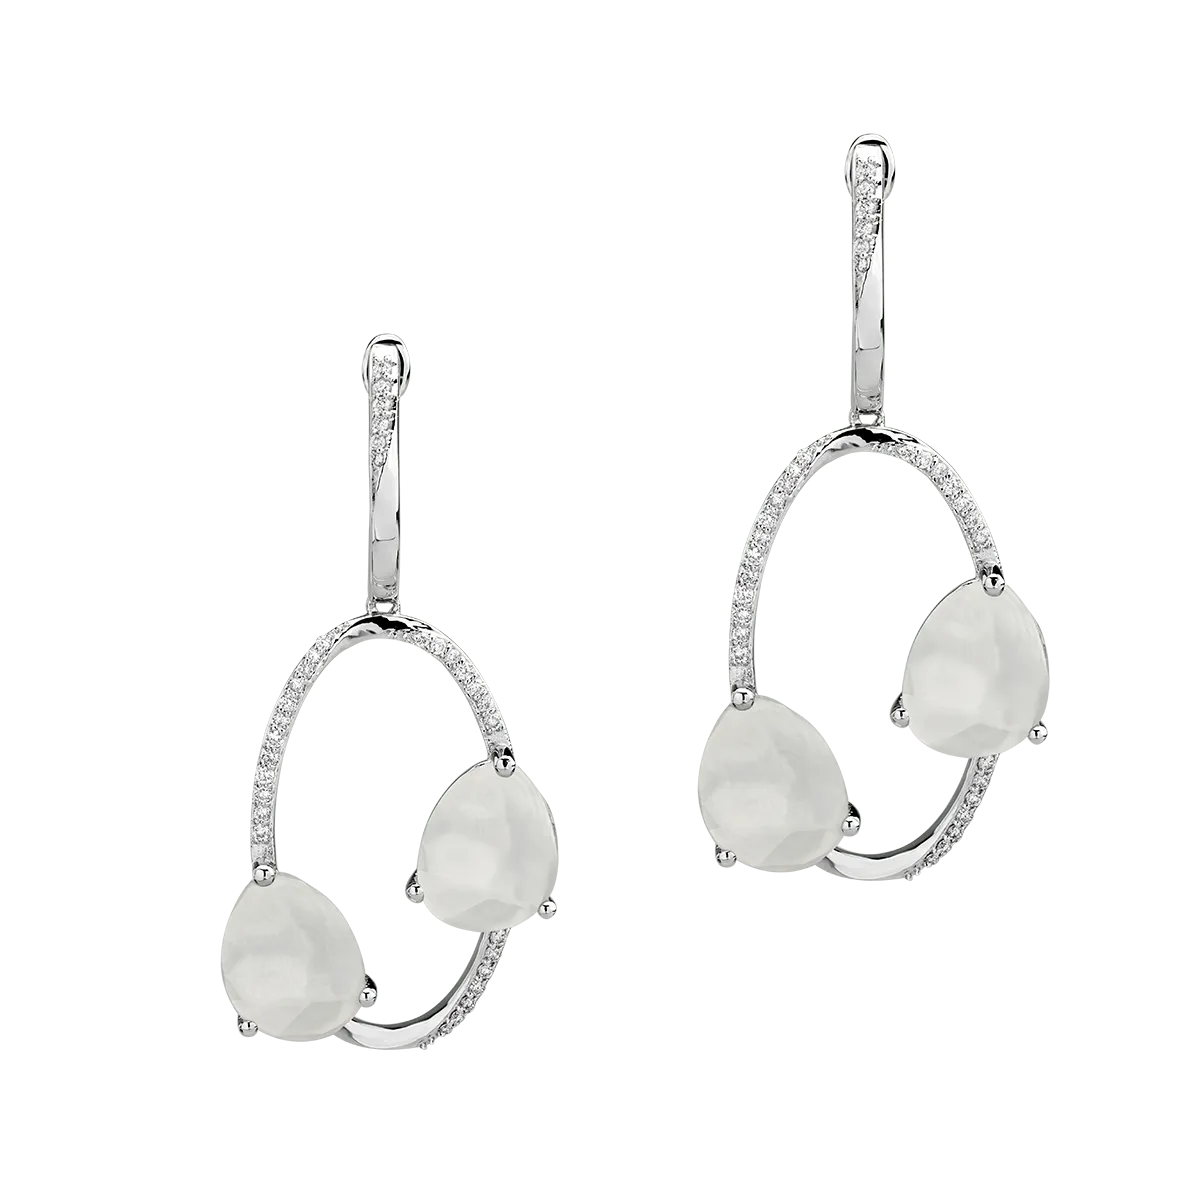 18K white gold earrings with 8.75ct white moonstone and 0.283ct diamonds